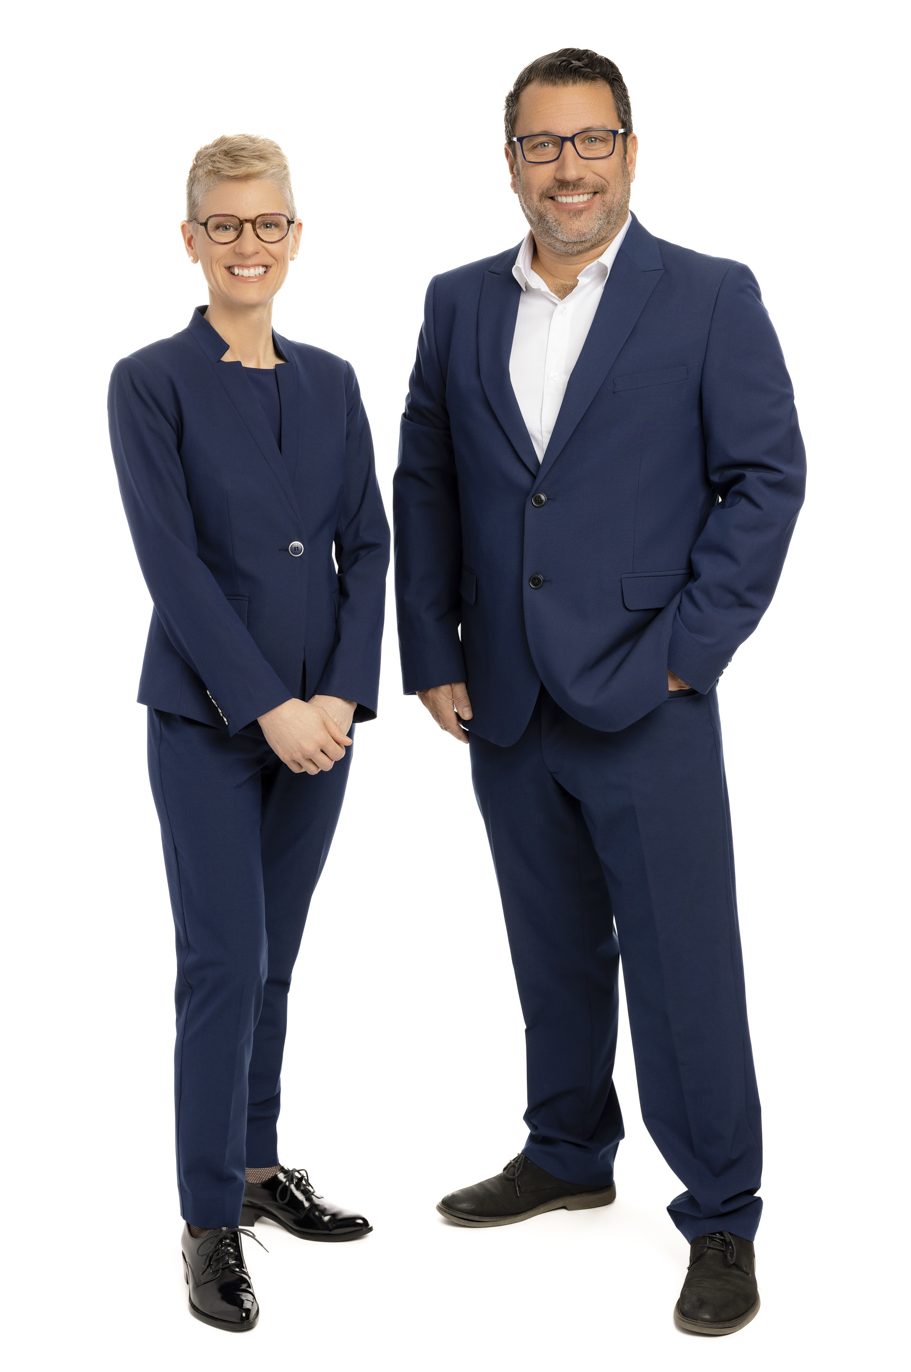 A woman and a man wearing the new Québec City Convention Centre uniform during an official photo session.